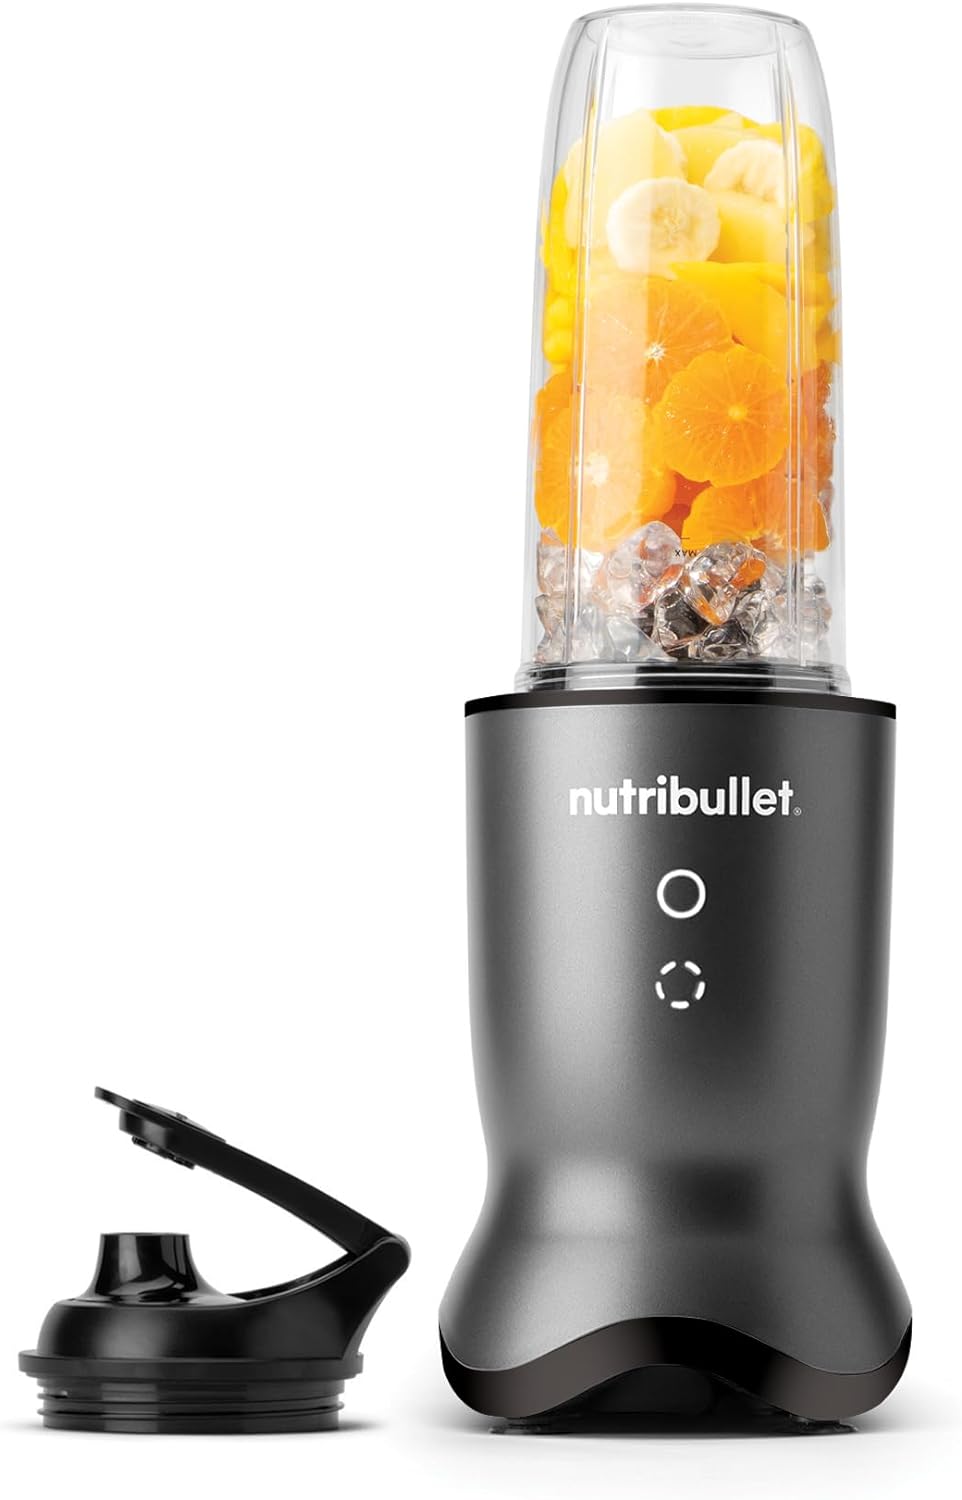 Nutribullet Personal Blender, The Most Powerful Mixer for One Portion, 1000 Watt and Quiet Motor, 900 ml Tritan Renew Cup, Luminous Touch Control Buttons